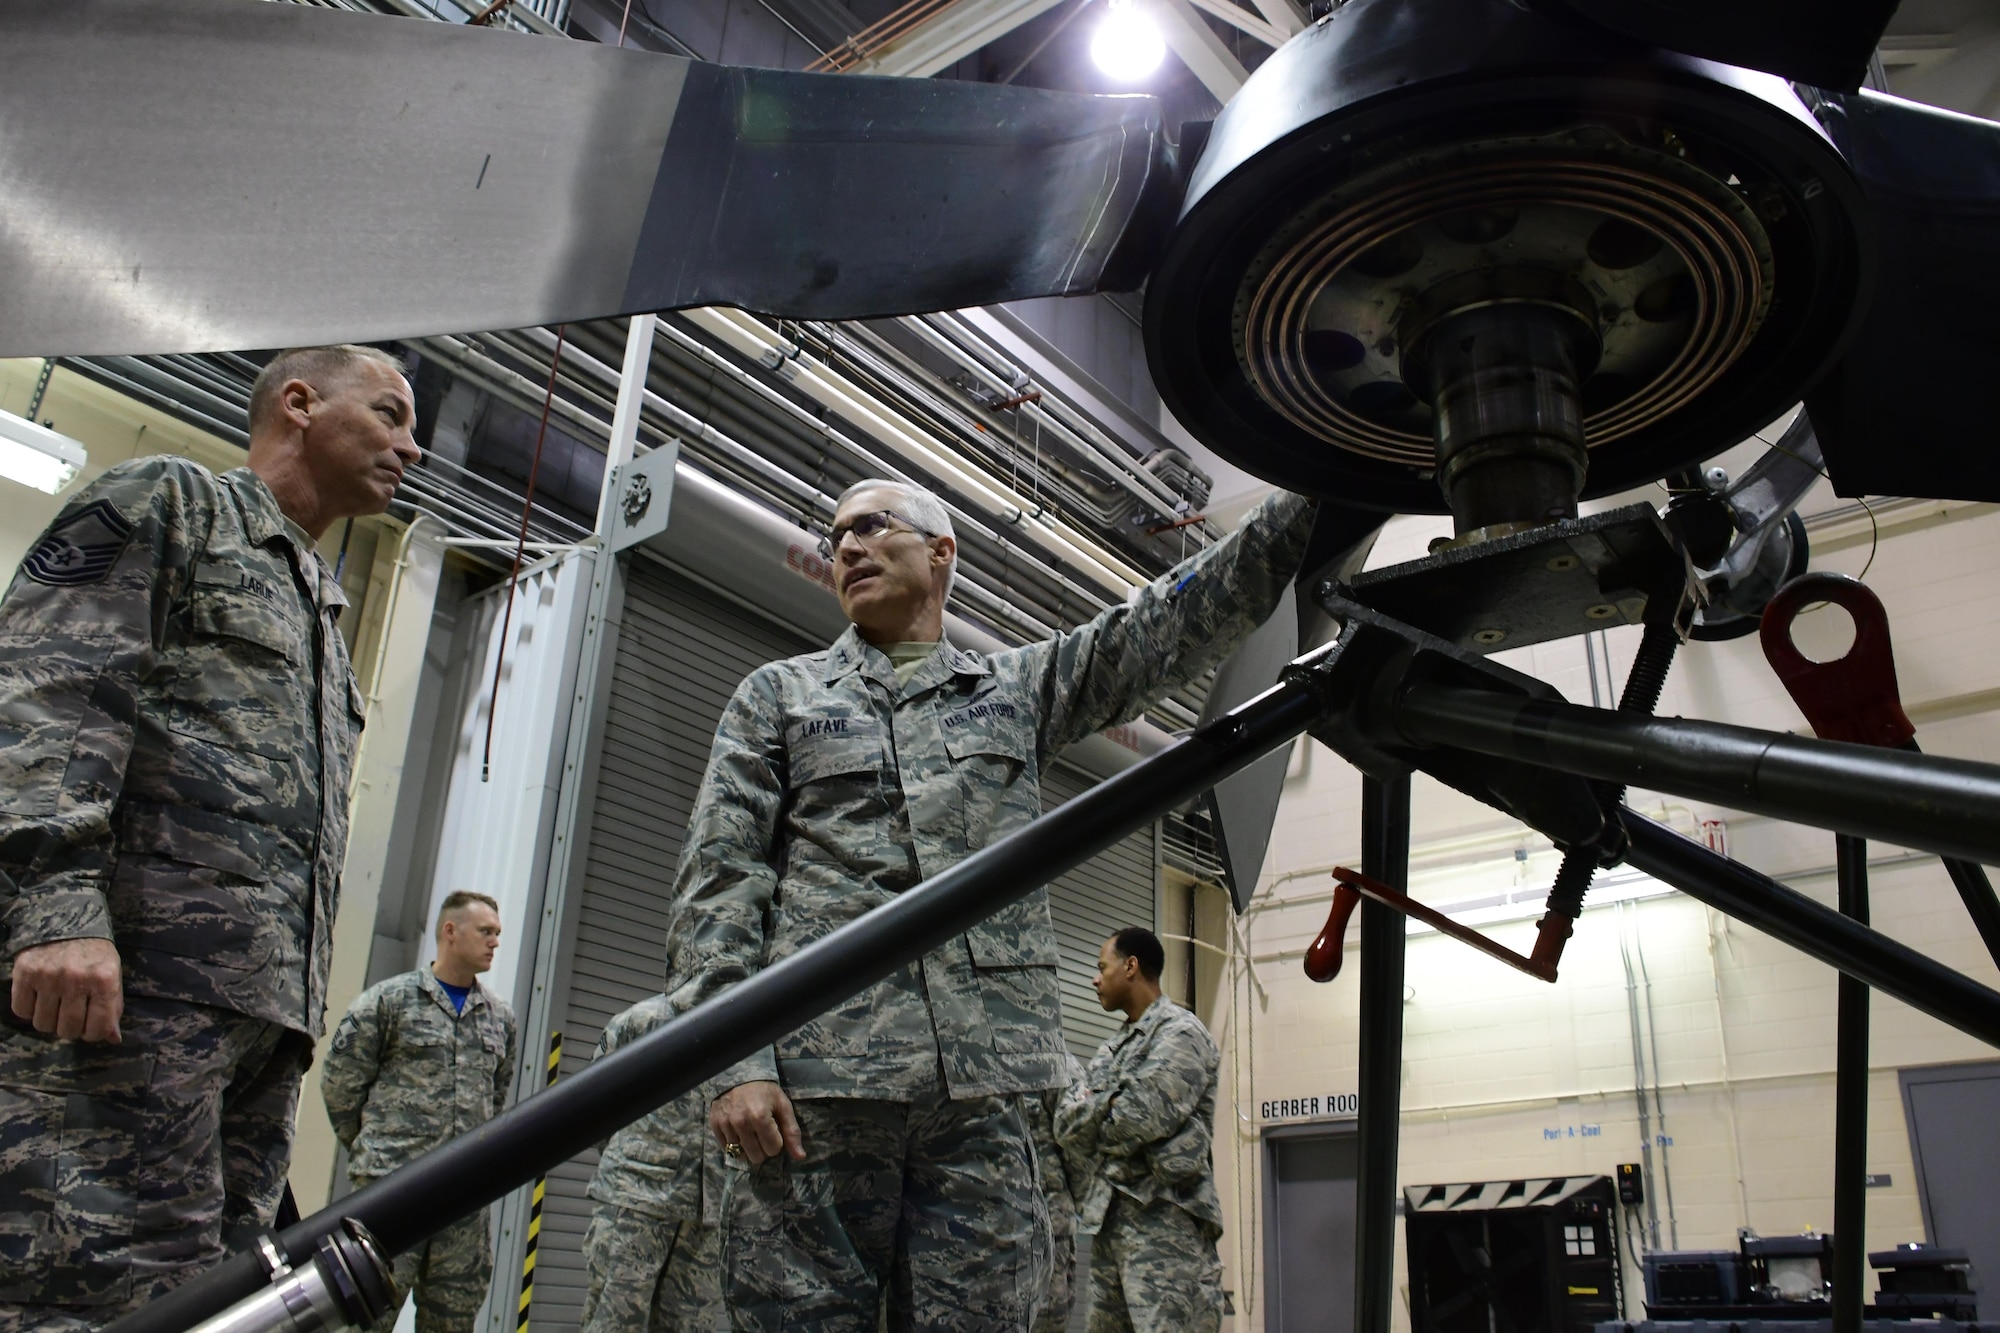 Maj. Gen. Craig La Fave, 22nd Air Force commander, examines a prop during a tour at Dobbins Air Reserve Base, Georgia Dec. 2, 2017. La Fave visited various facilities and met squadron leaders during the tour. (U.S. Air Force photo by Staff Sgt. Miles Wilson)